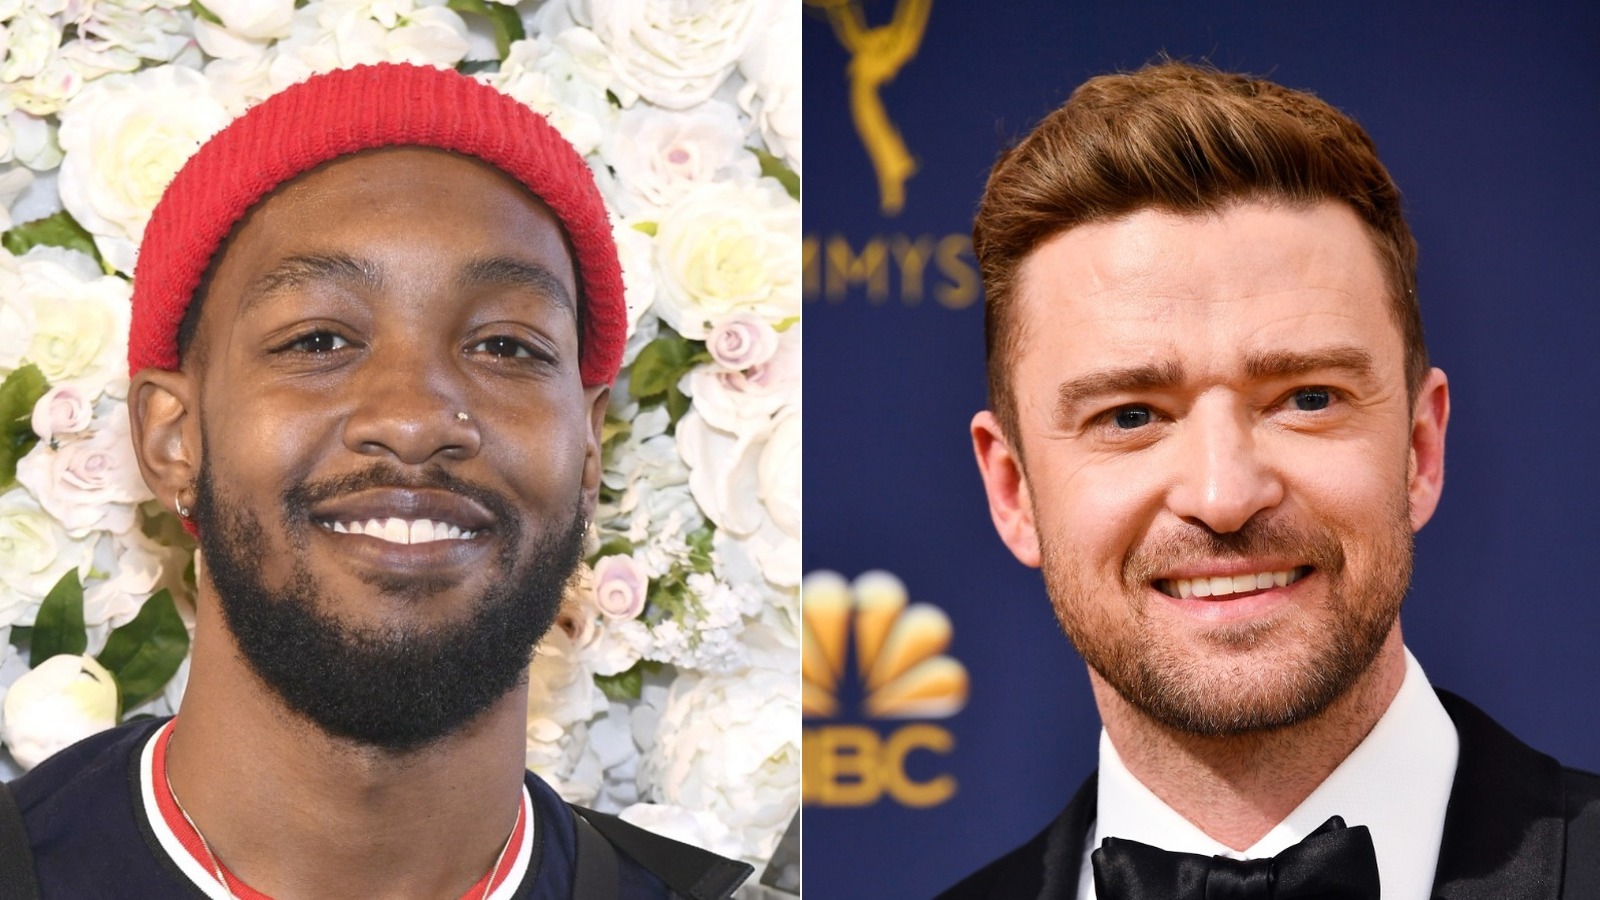 The Real Meaning Of 'Better Days' By Ant Clemons And Justin Timberlake